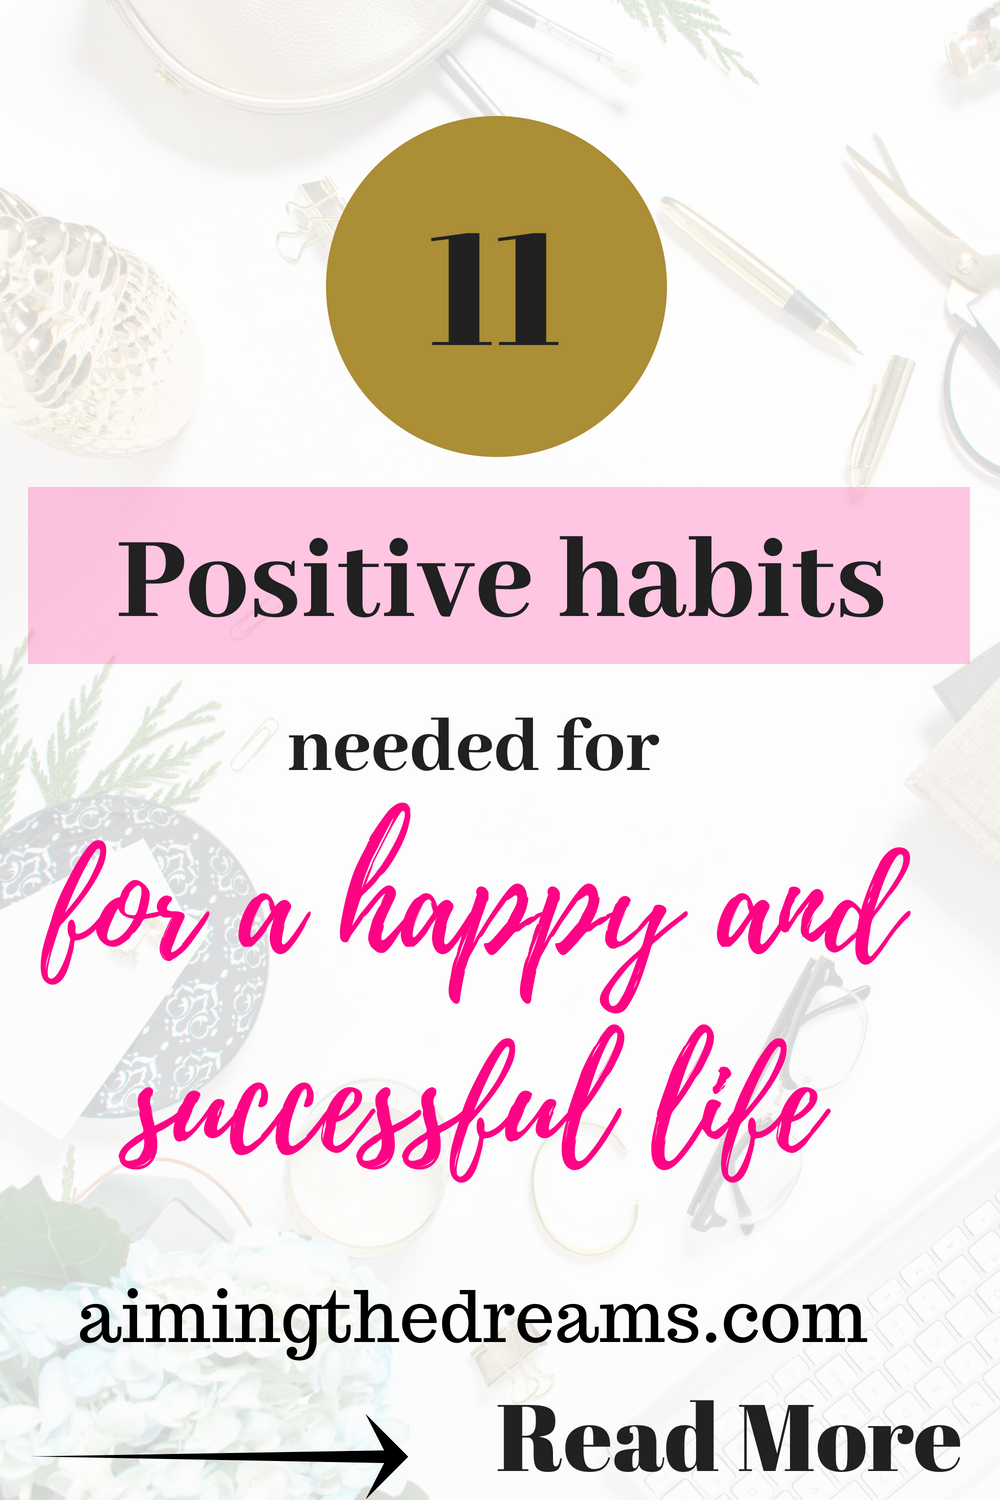 Cnanging your habits towards positivity helps in making life more beautiful and success comes from all the phases of life. Little changes daily helps in gearing your life towards happiness and success.